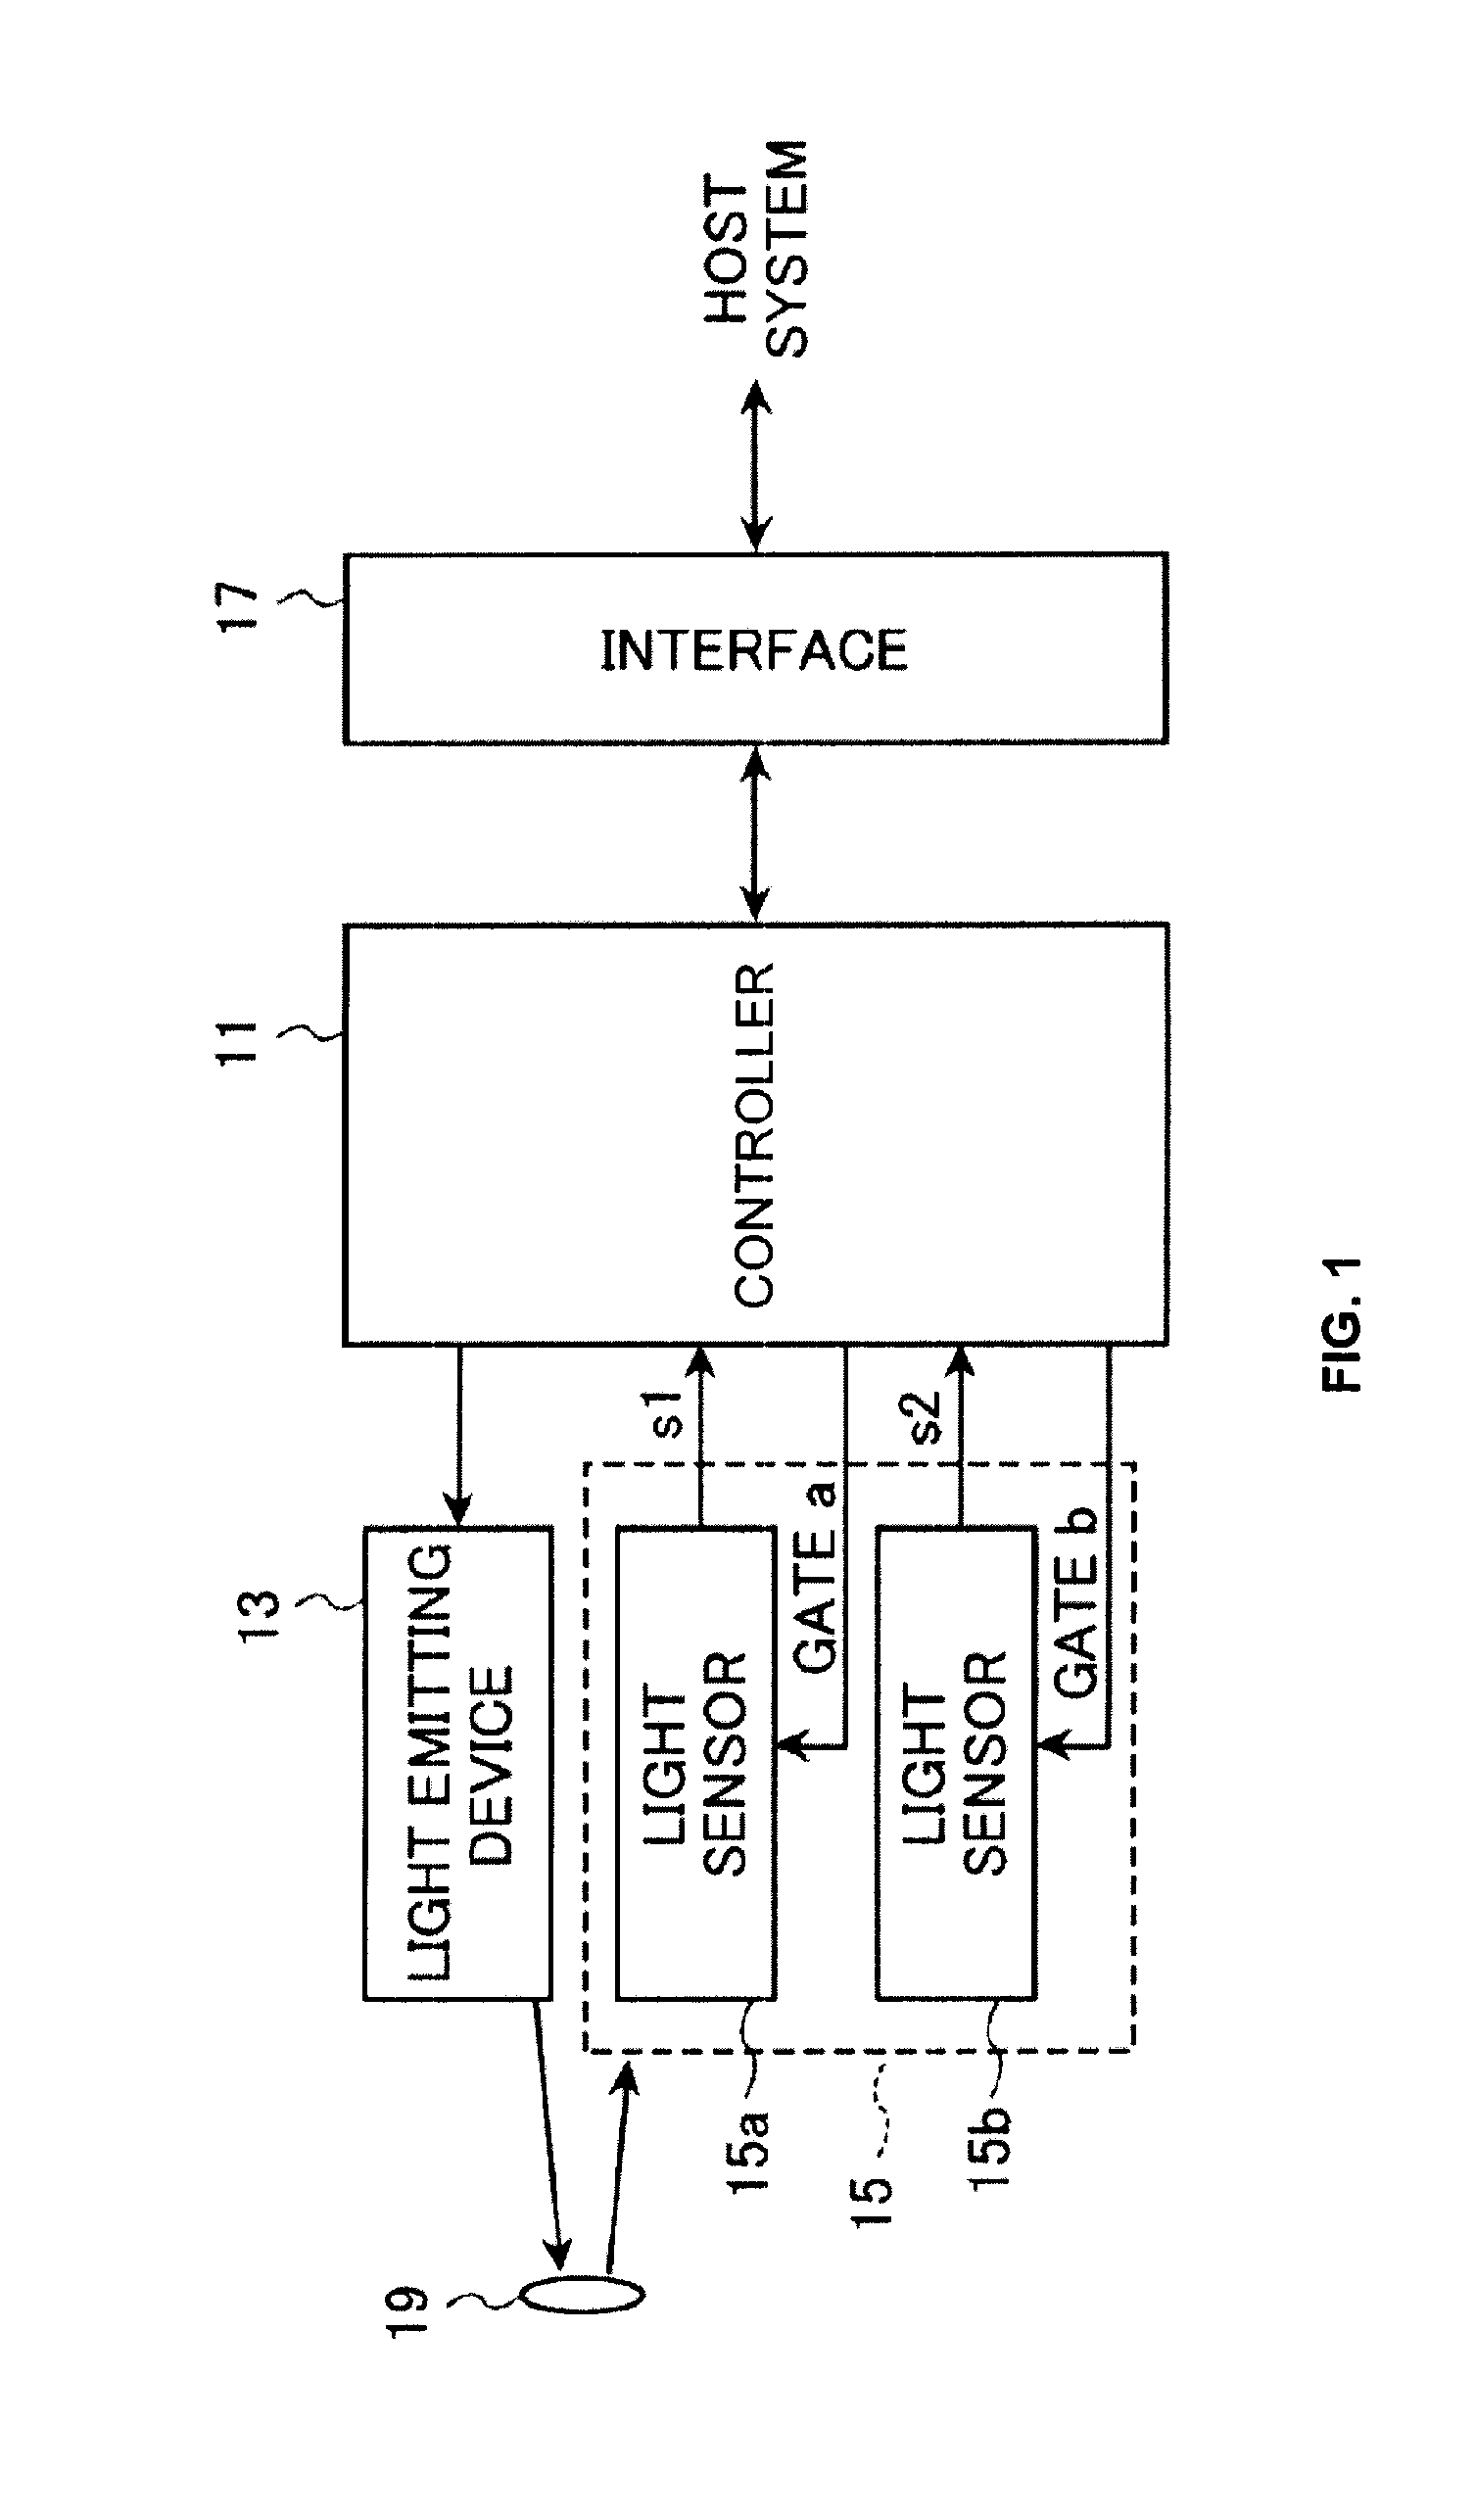 Distance detection device and method including dynamically adjusted frame rate